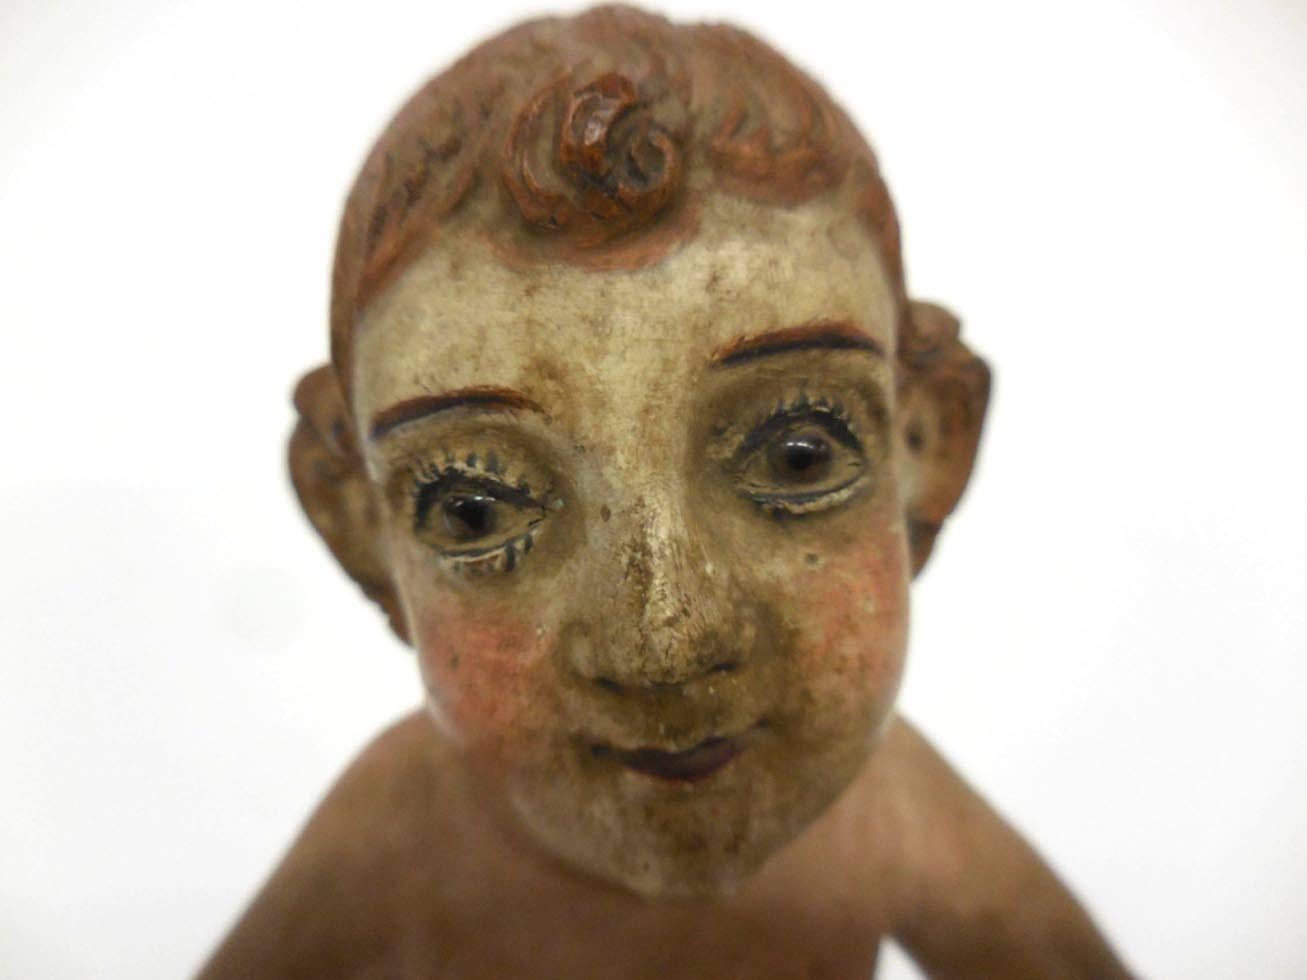 Very sweet boy with red curly hair, rosy cheeks and big eyes. Polychrome on cedro wood. 19th century nino. Two fingers on the left hand are chipped off. Feet are intact. Big ears. Nino itself measures about 6.5